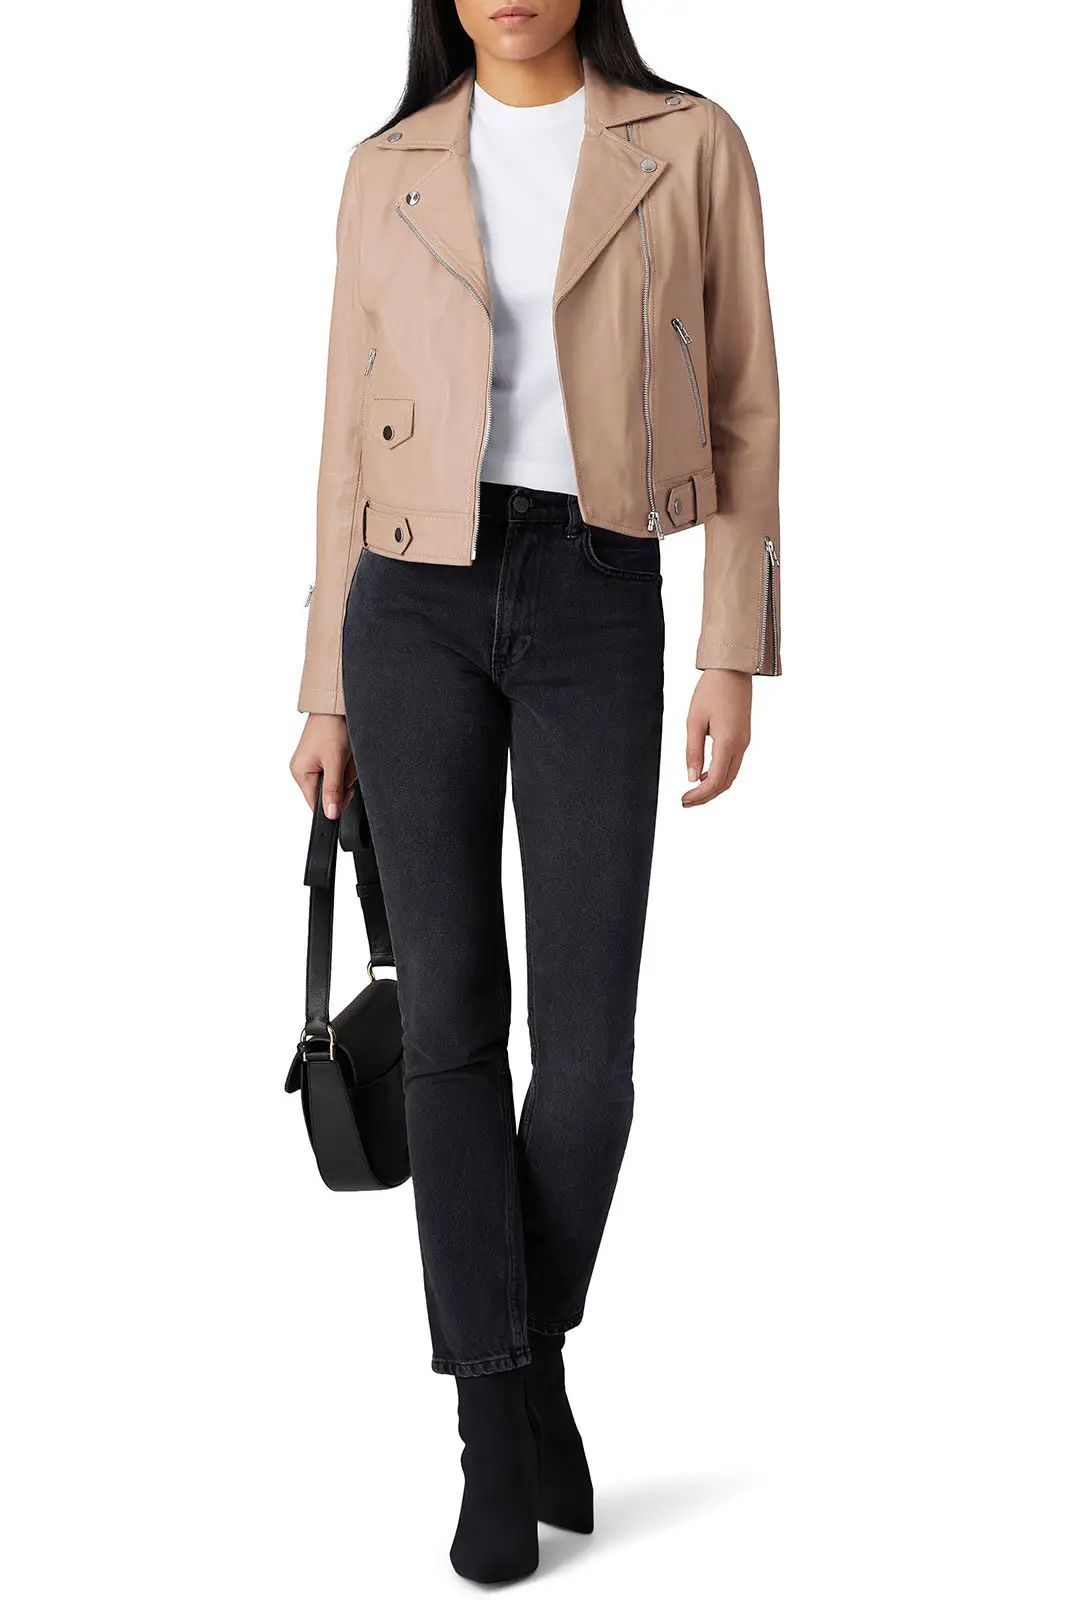 Slate & Willow Nude Classic Leather Moto Jacket | Rent The Runway